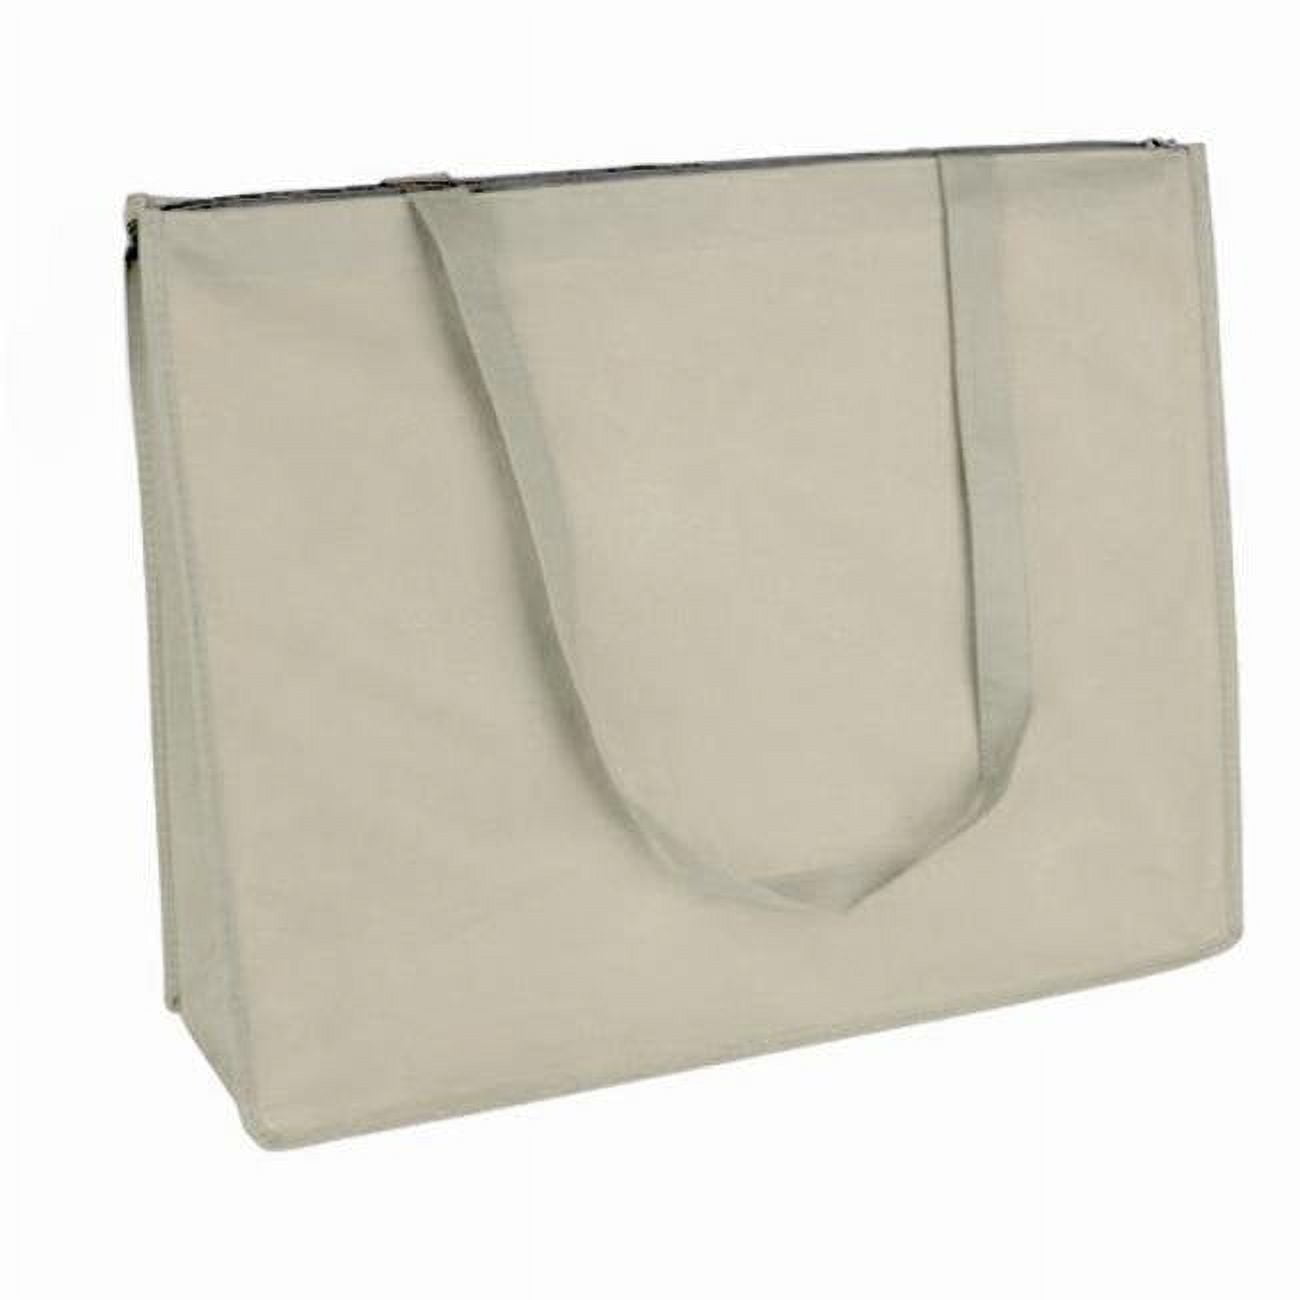 2333800 Tote Bag - Natural, Extra Large - Case Of 120